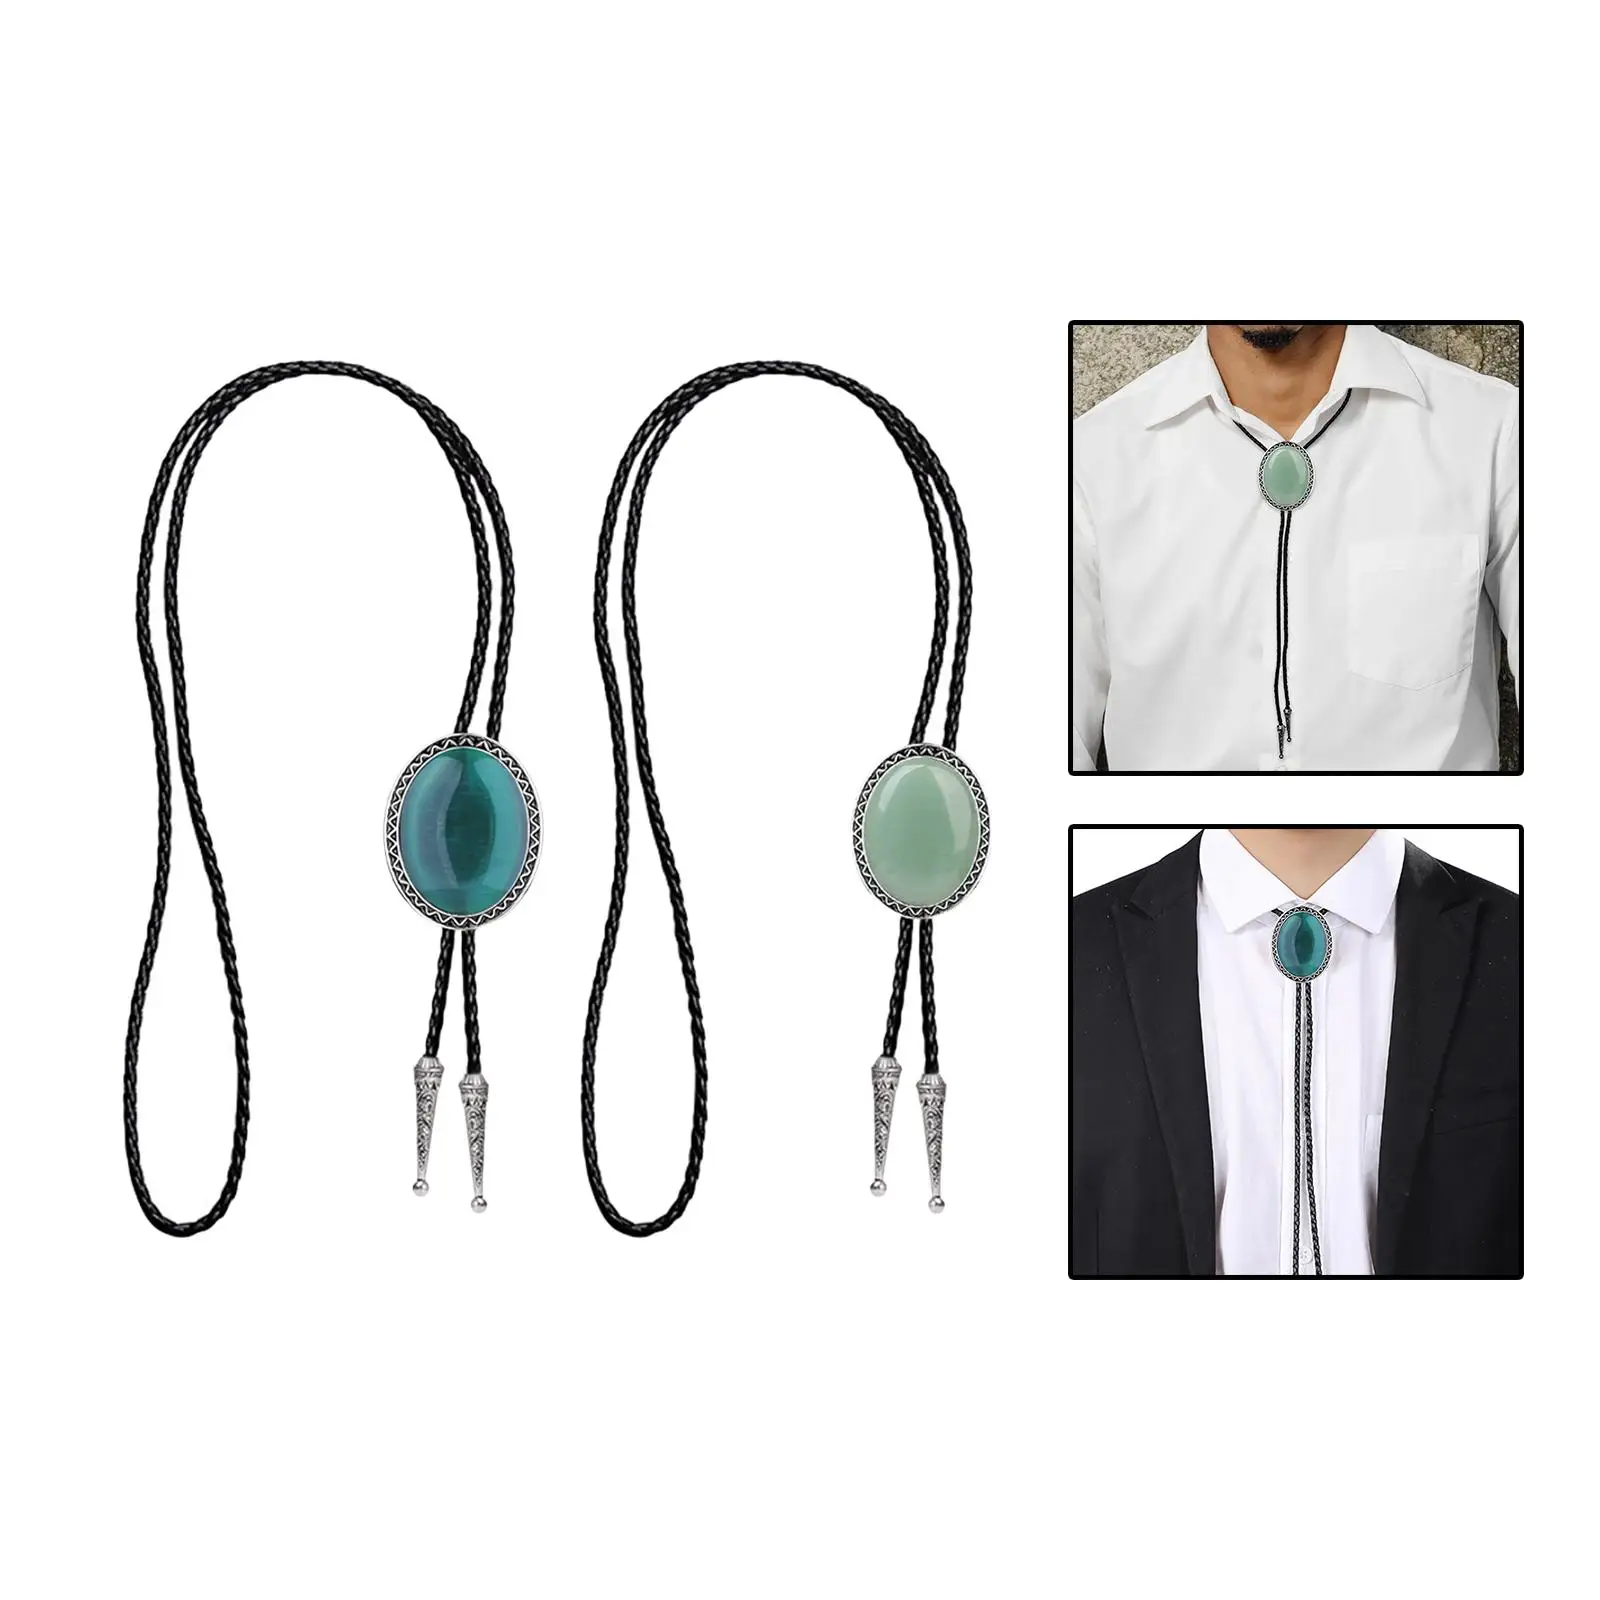 Fashion Bolo Tie, Pendant Creative Versatile Necklace Casual Clothing Accessory Necktie for Sweater Shirts suits Gift Hoodies